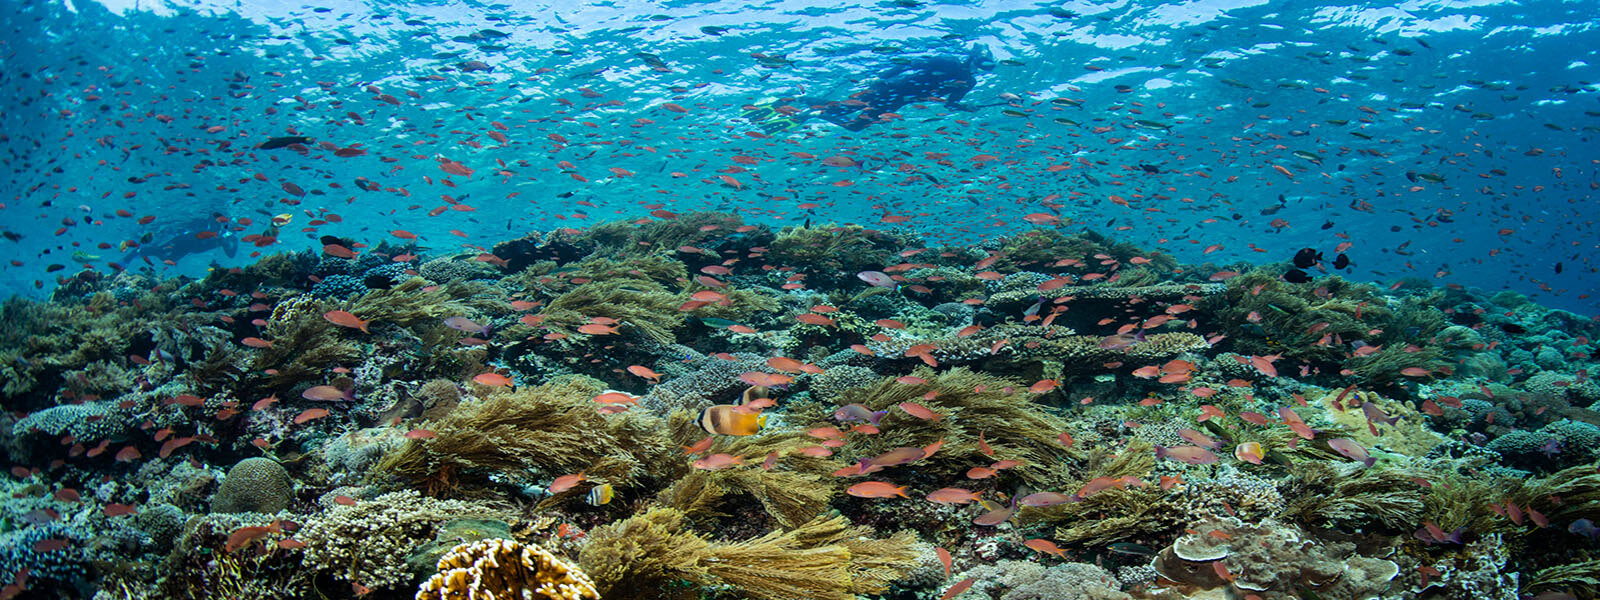 Snorkeling with thousands of anthias on a snorkeling tour to Alor, Indonesia